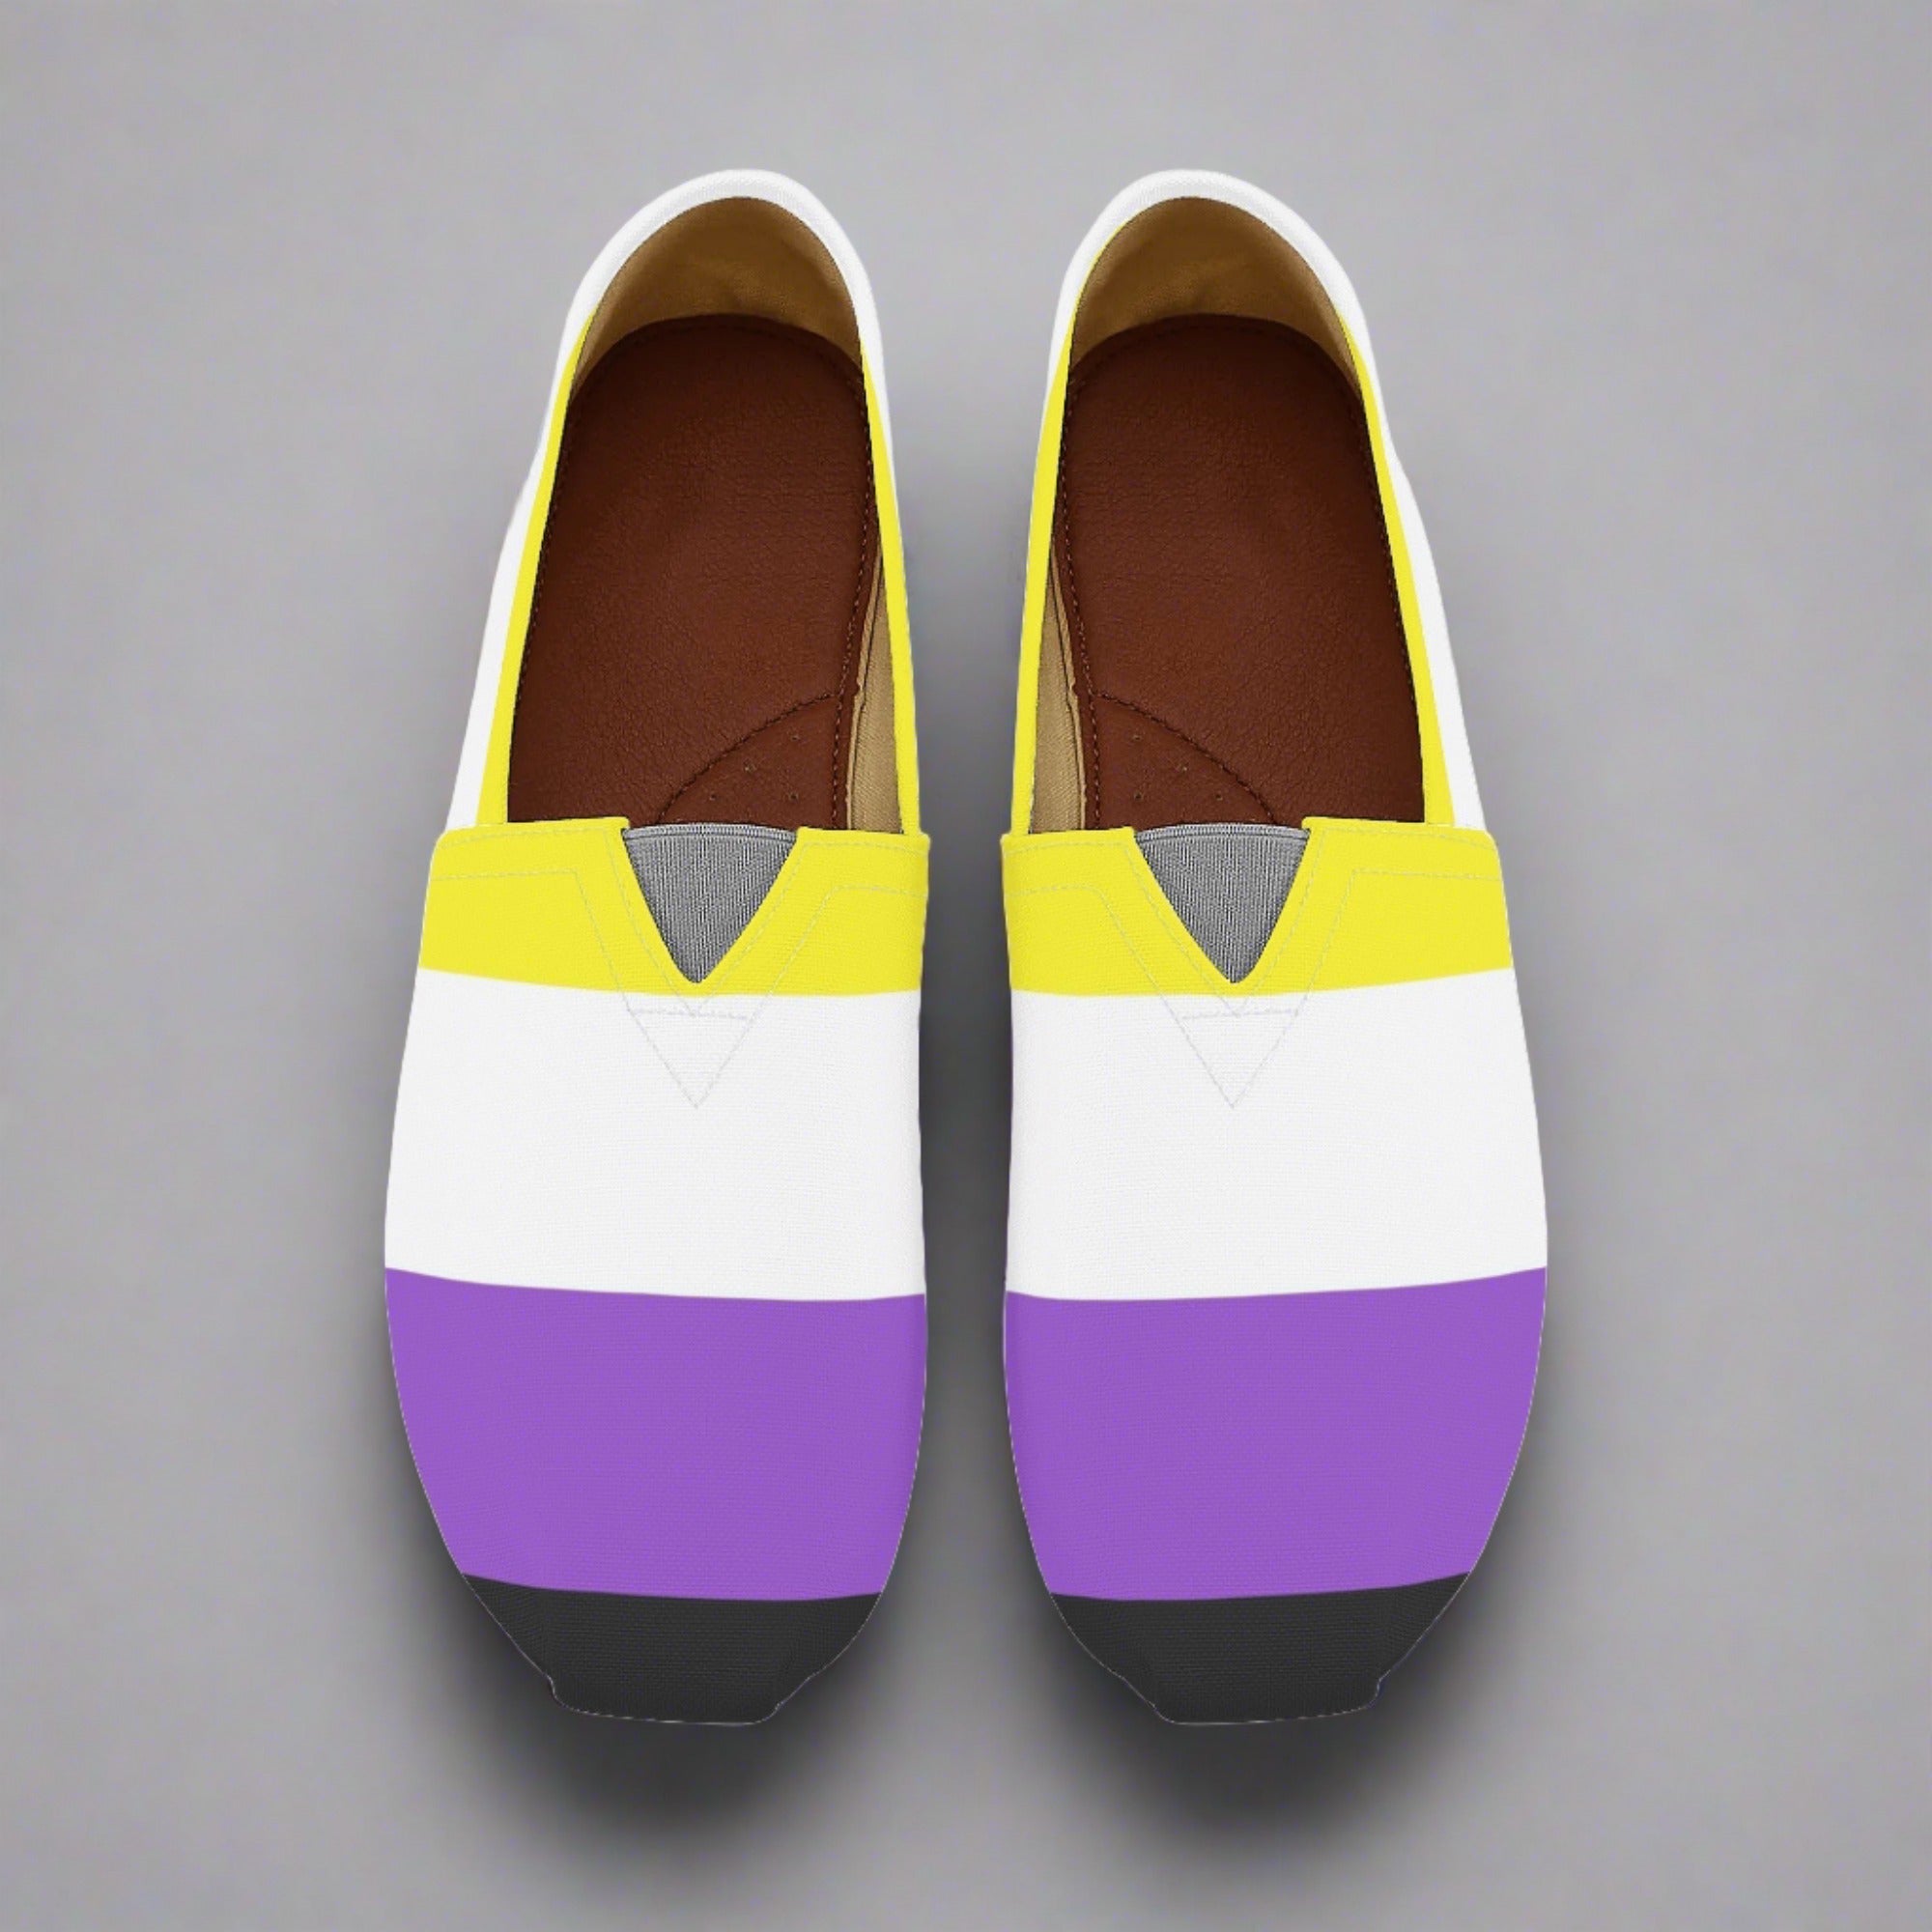 Non-binary Pride Flag Slip-On Canvas Shoes (Mens Sizing)